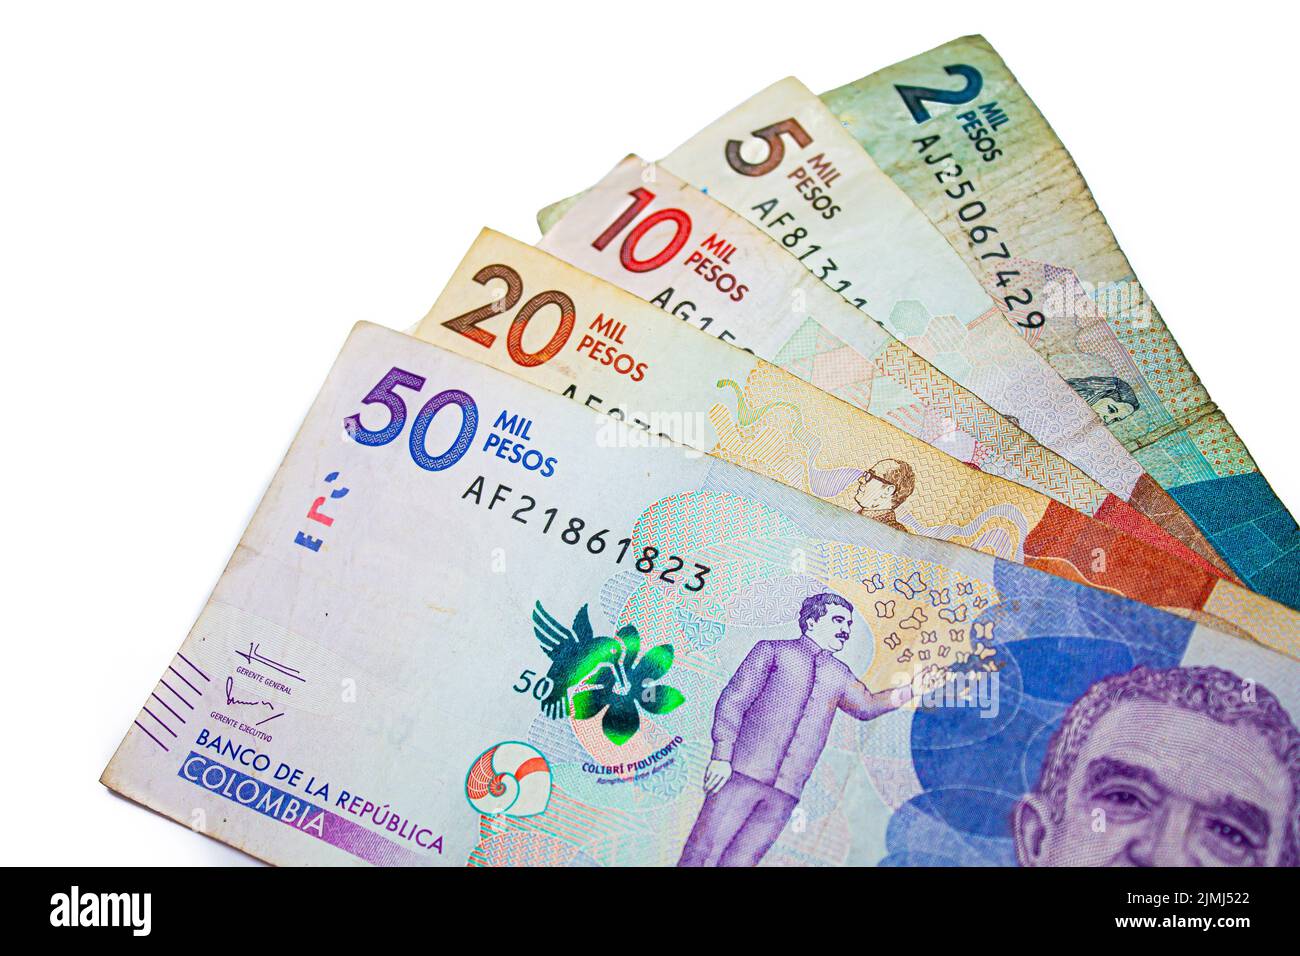 Colombian peso bills of value $2000, $5000, $10000, $20000 and $50000 pesos on white background, August 6, 2022 Stock Photo